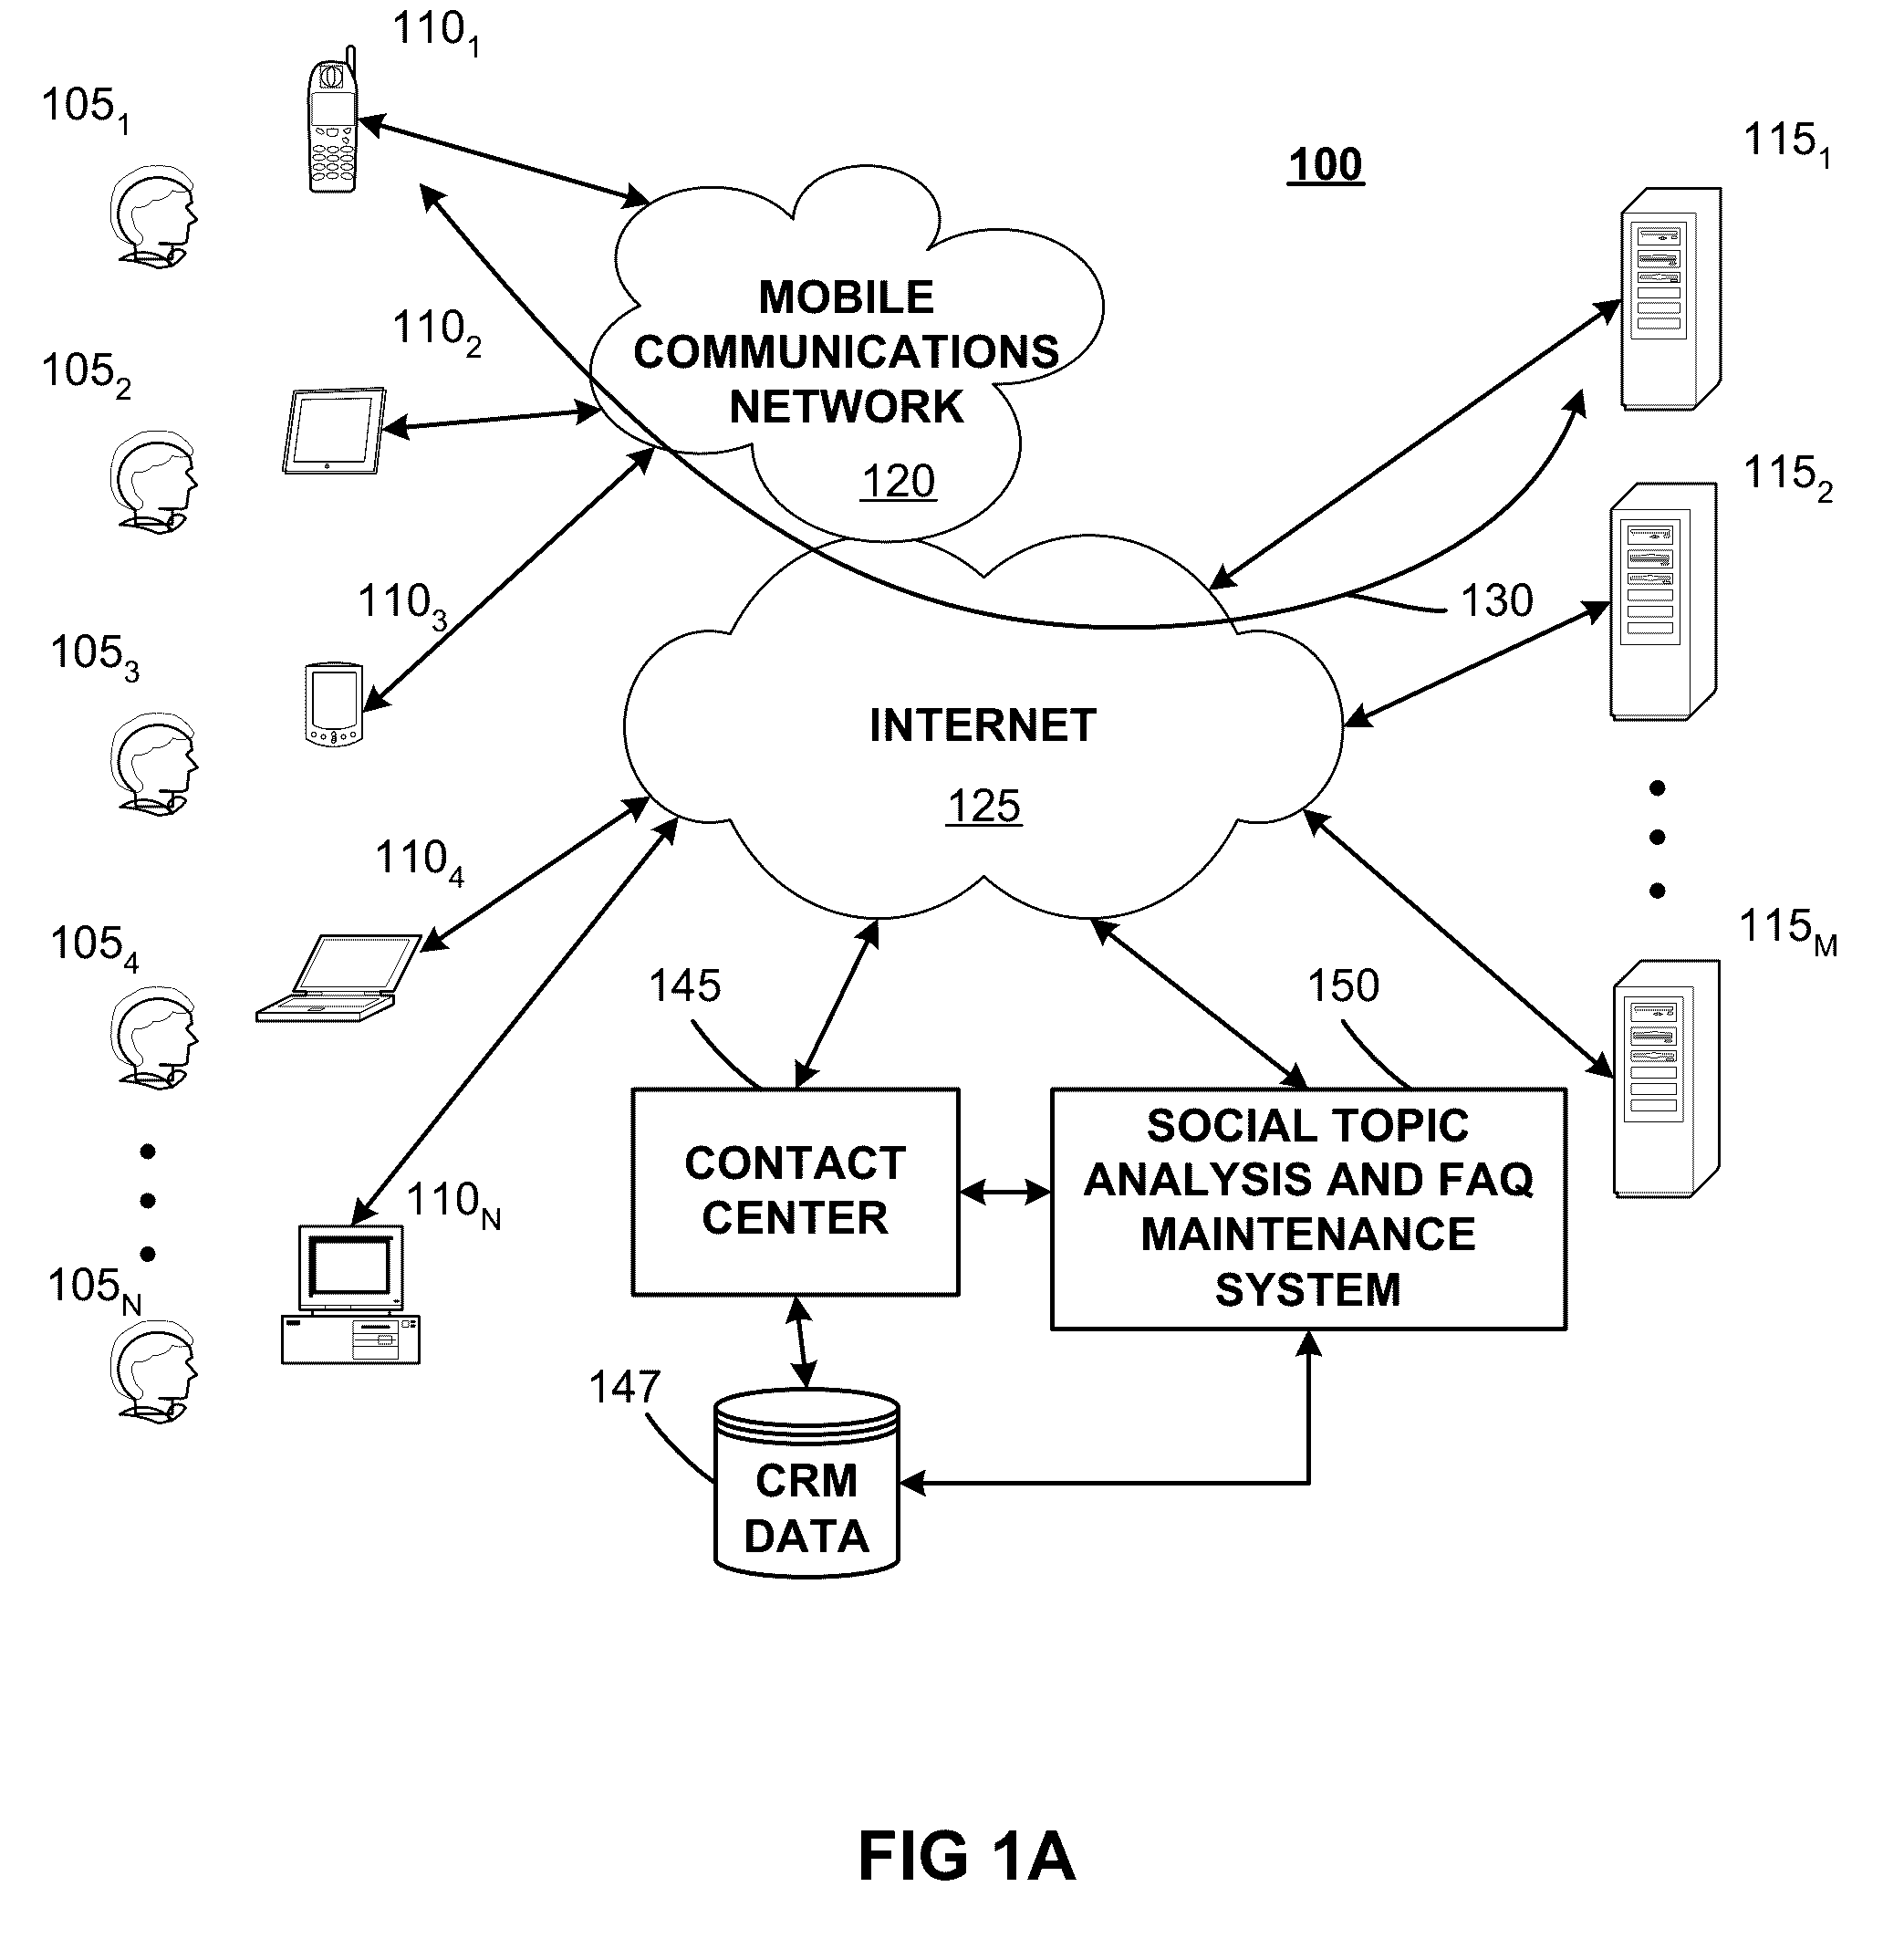 System and method for compiling and dynamically updating a collection of frequently asked questions